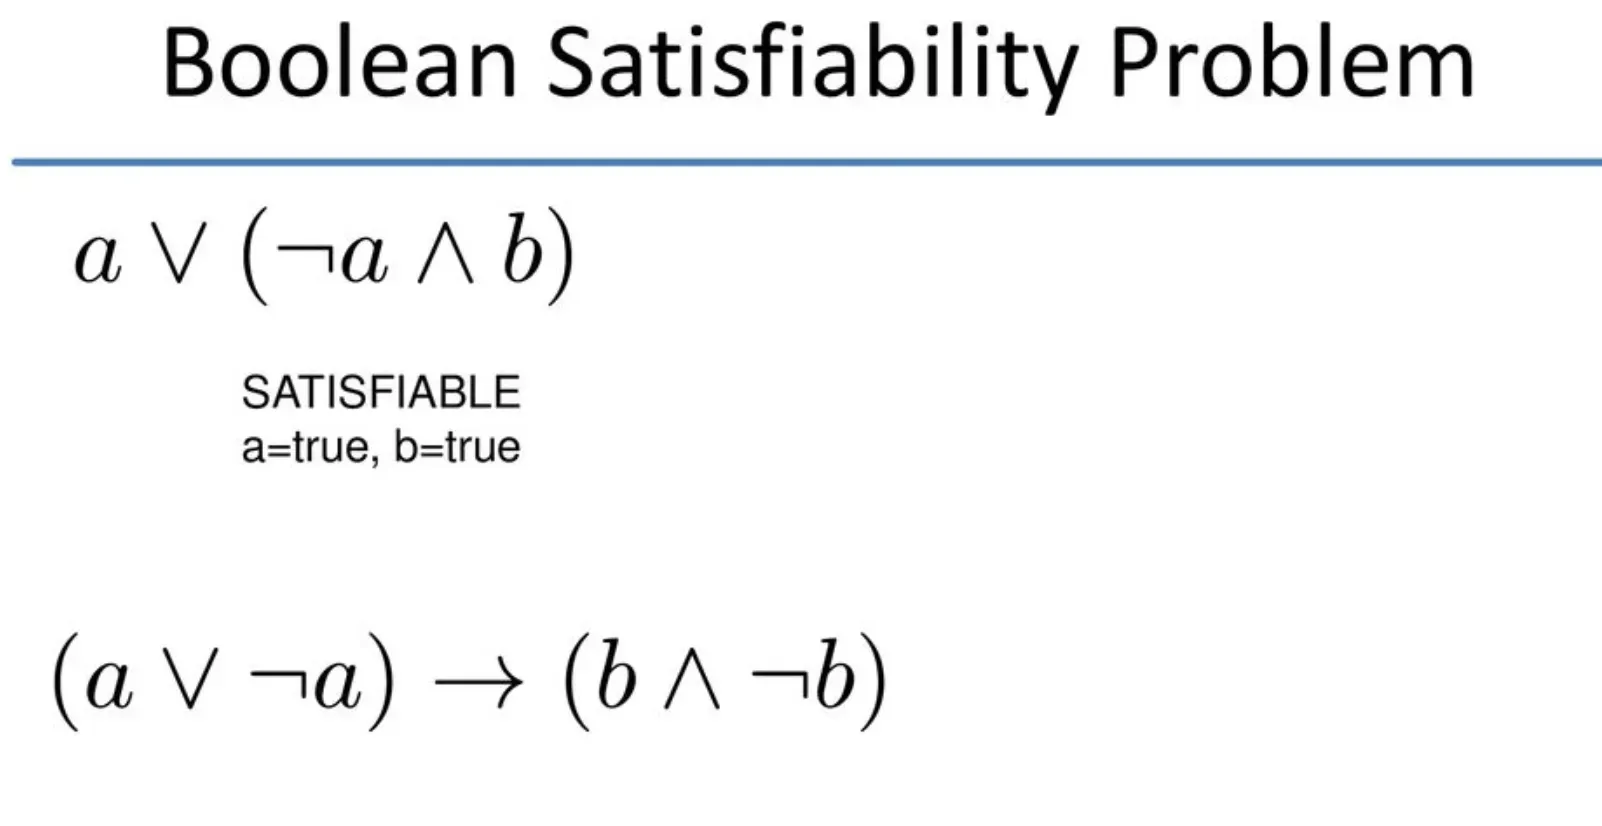 How is the Boolean Satisfiability Problem Solved?